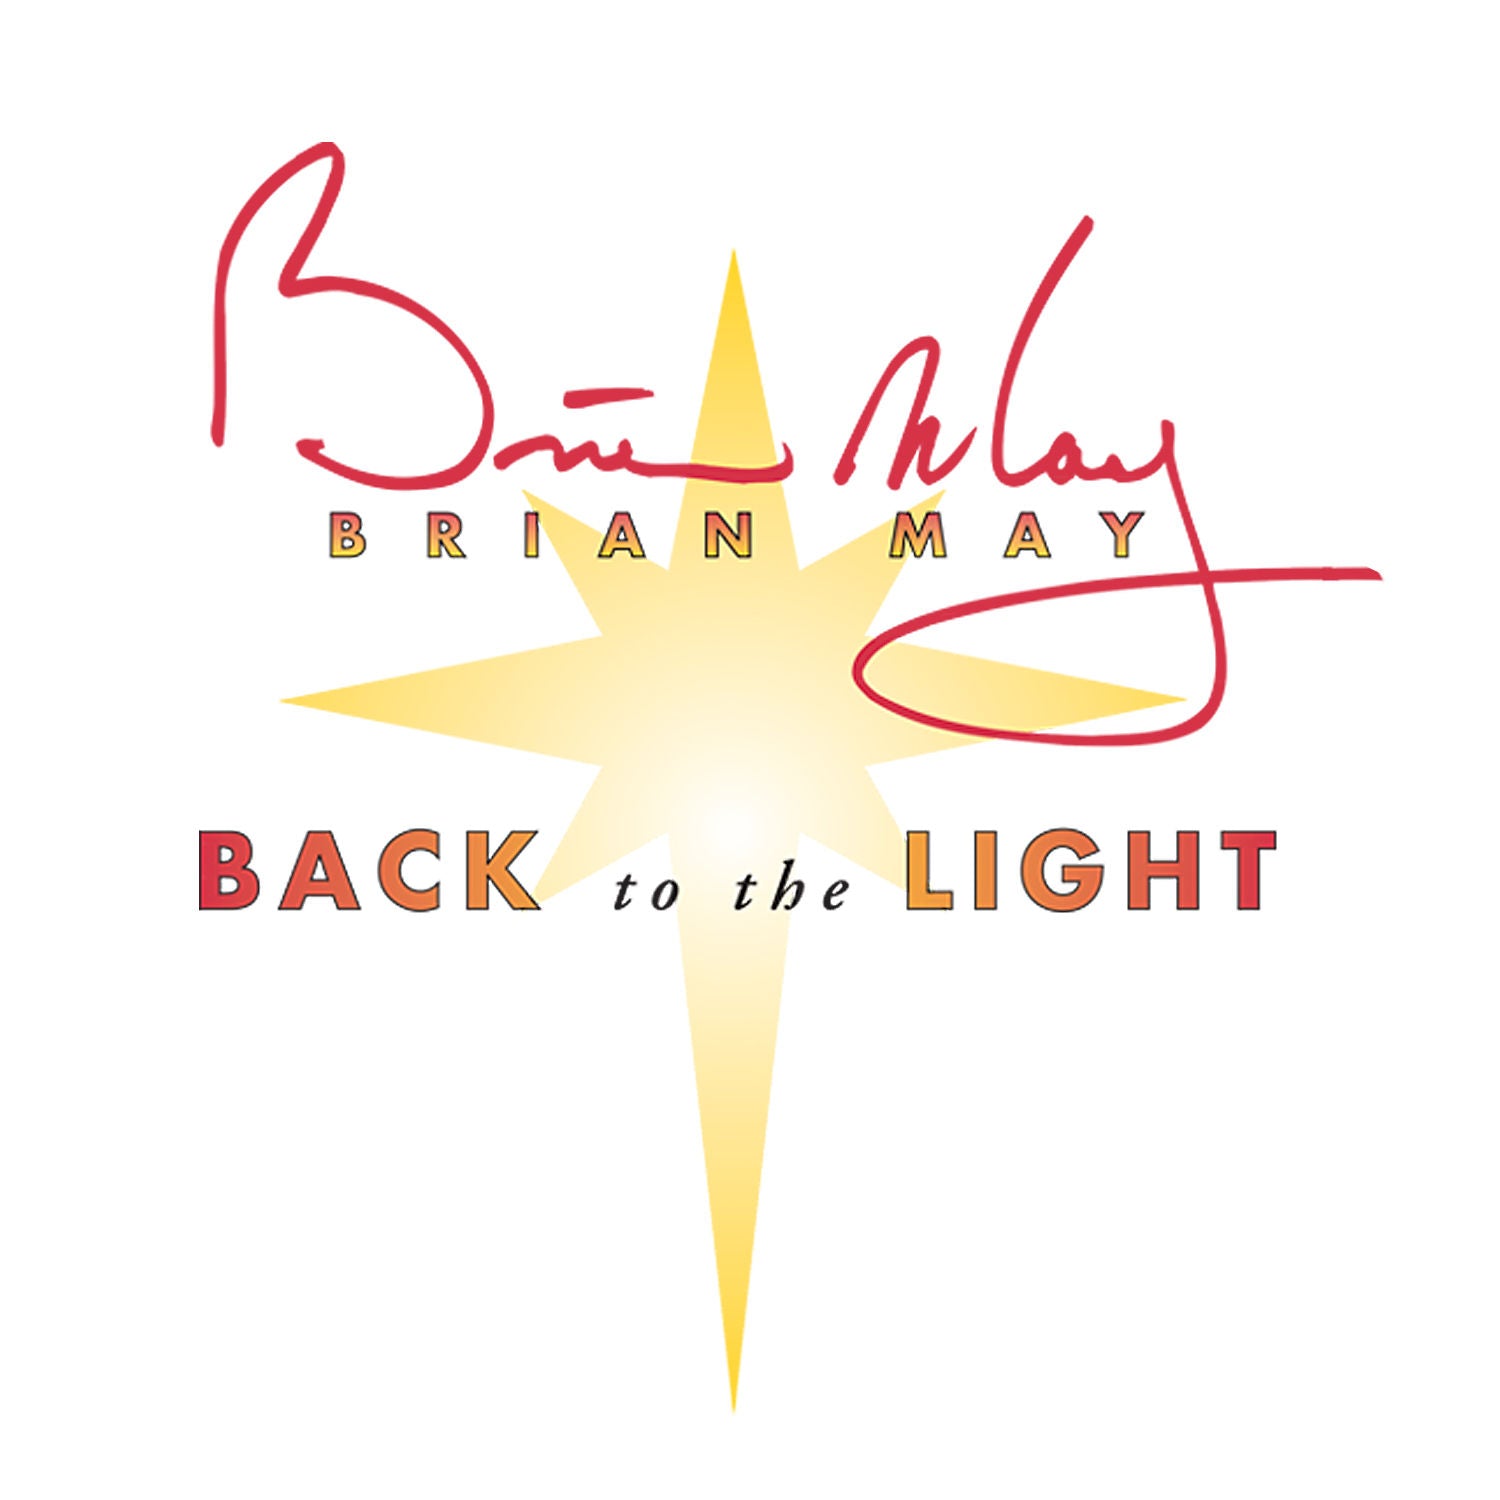 Brian May - Back To The Light Front Print White